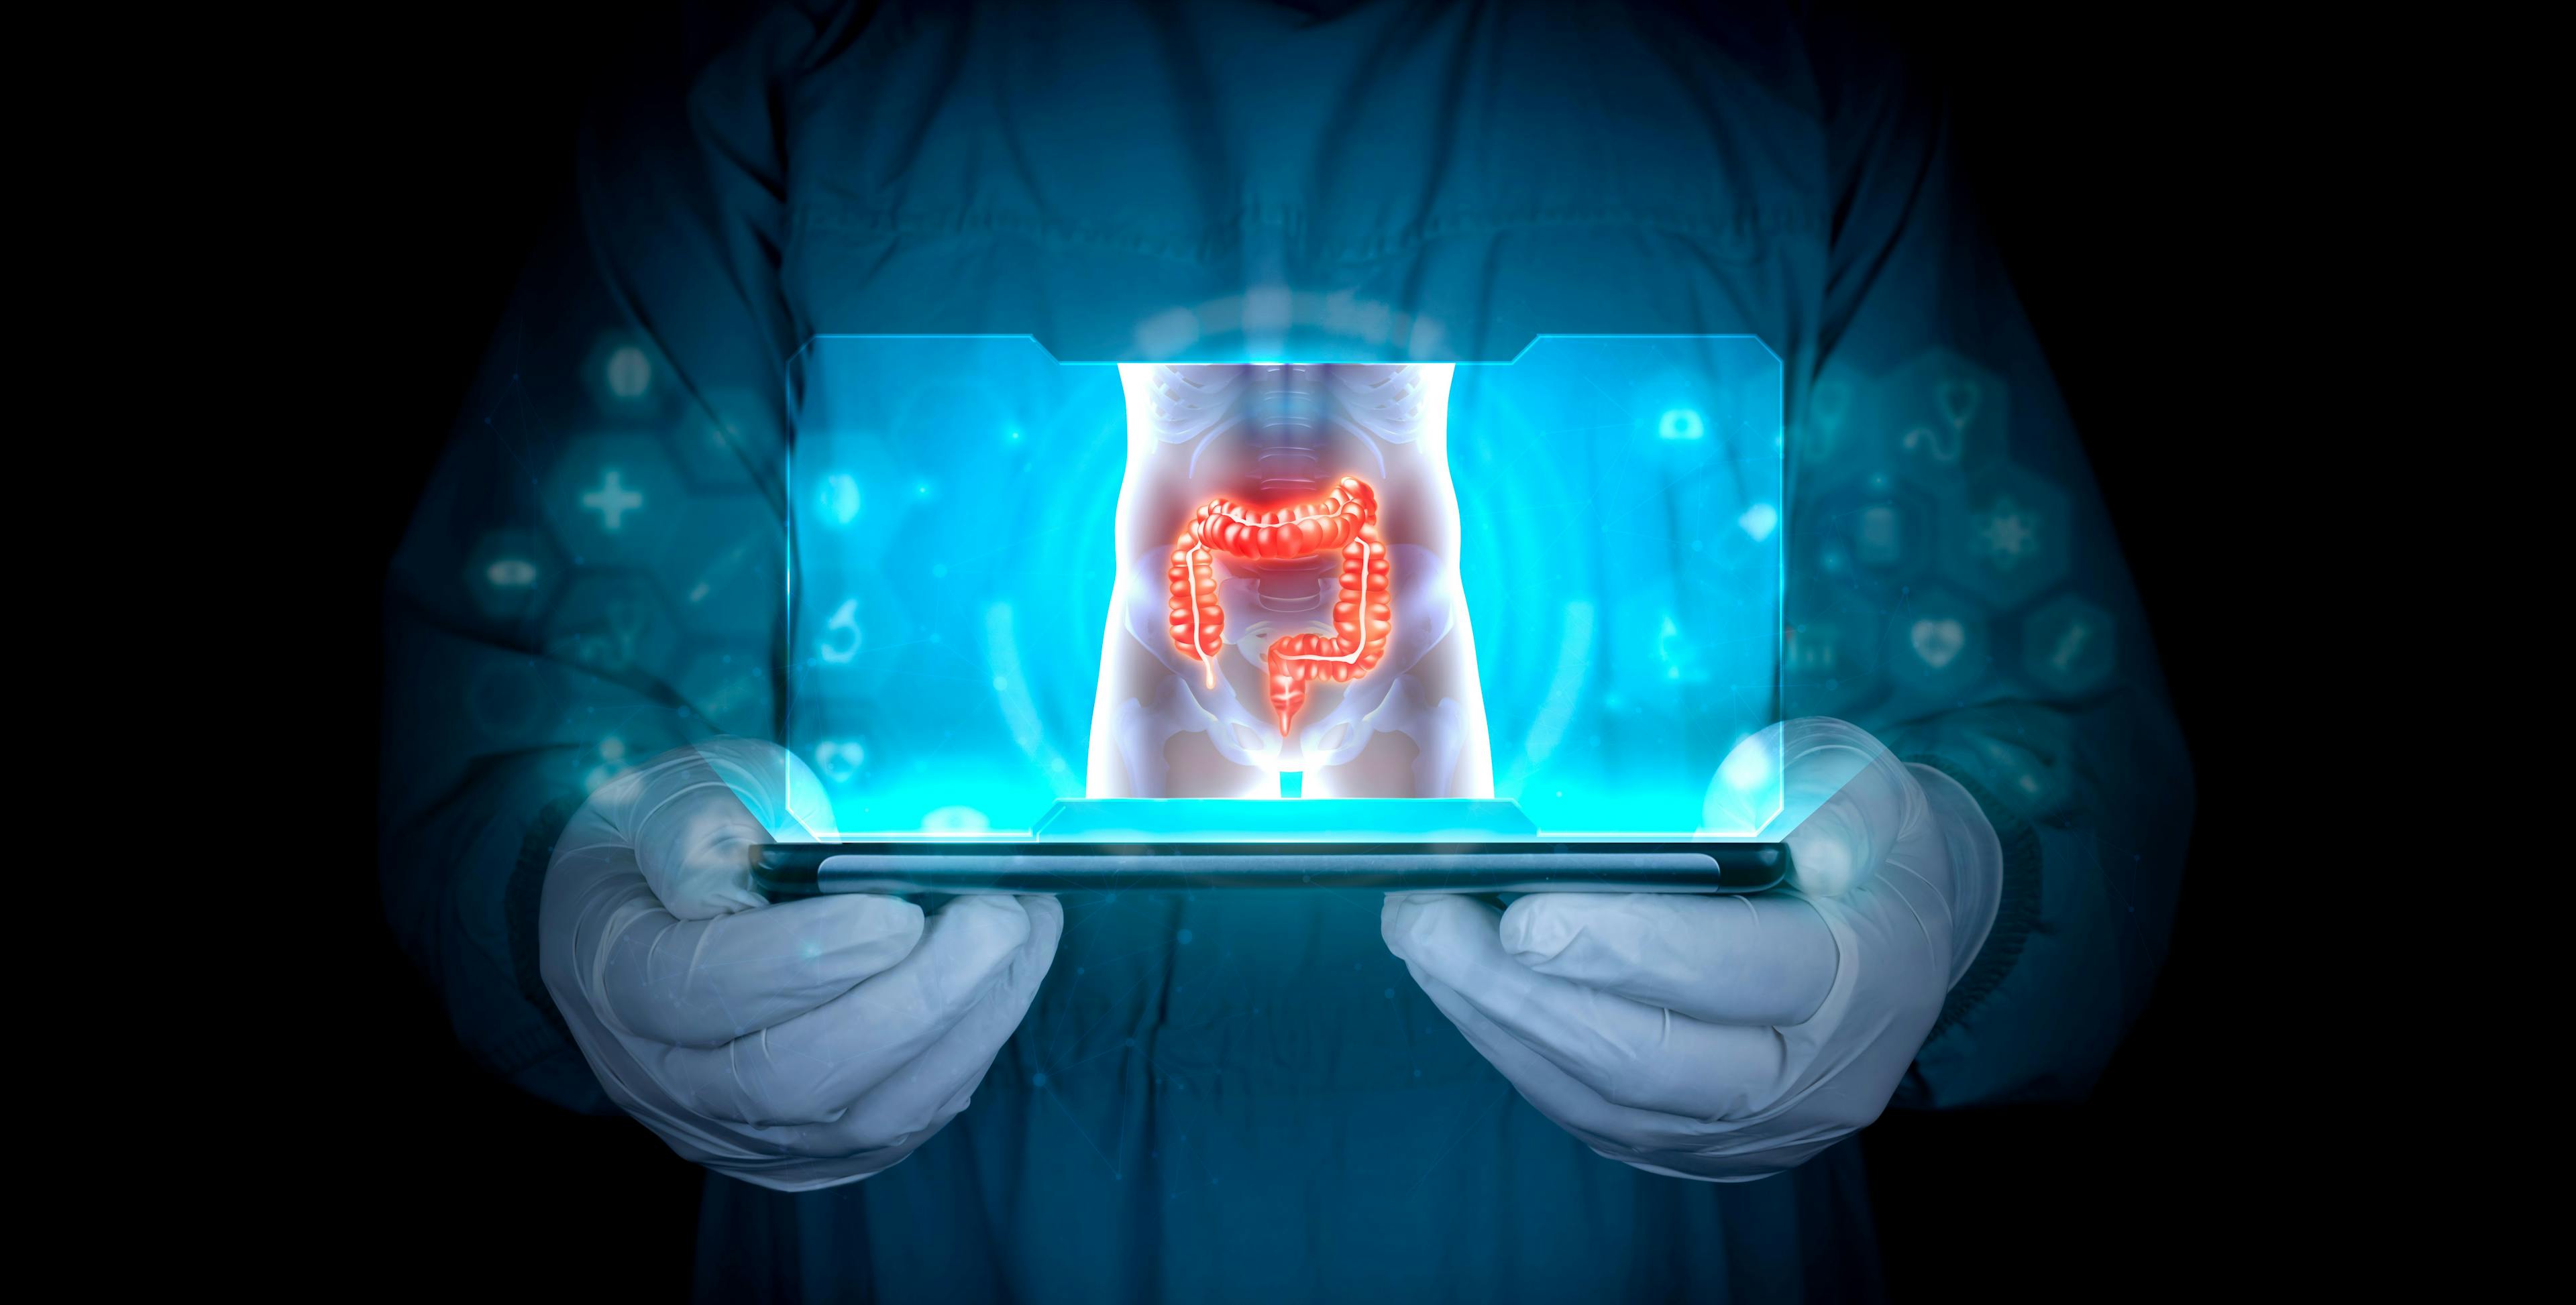 Doctor projects the human large intestine on the tablet. Study and analysis of colon cancer, bacteria, inflammation, ulcerative colitis, colonoscopy, diverticulosis. Health technology development: © Tom - stock.adobe.com